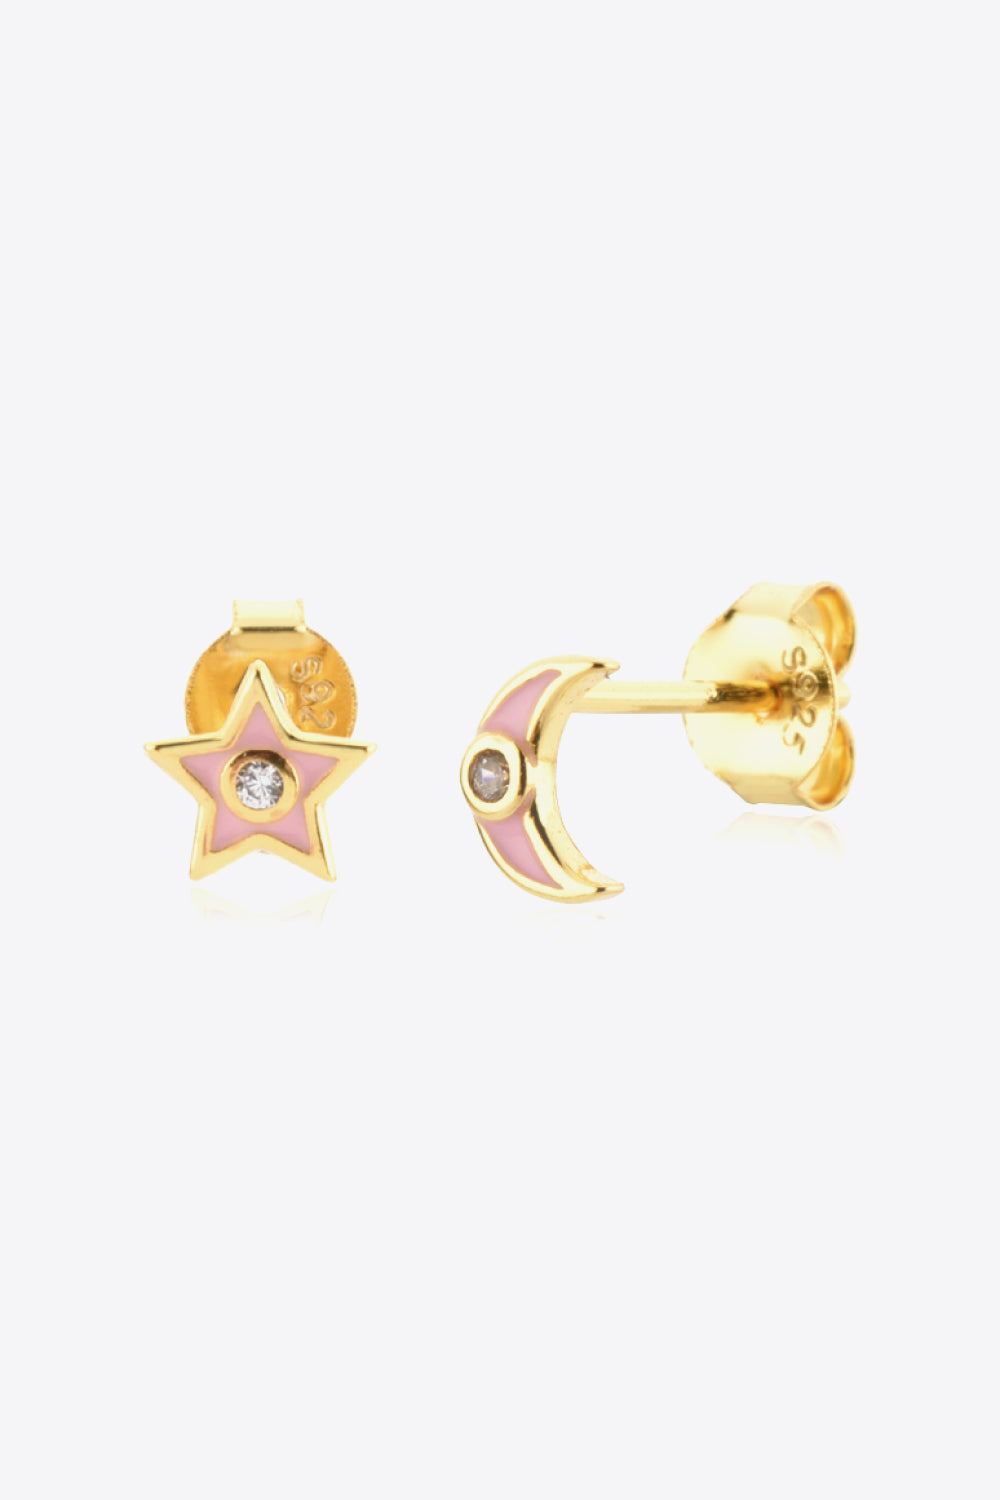 Star and Moon Zircon Mismatched Earrings The Stout Steer